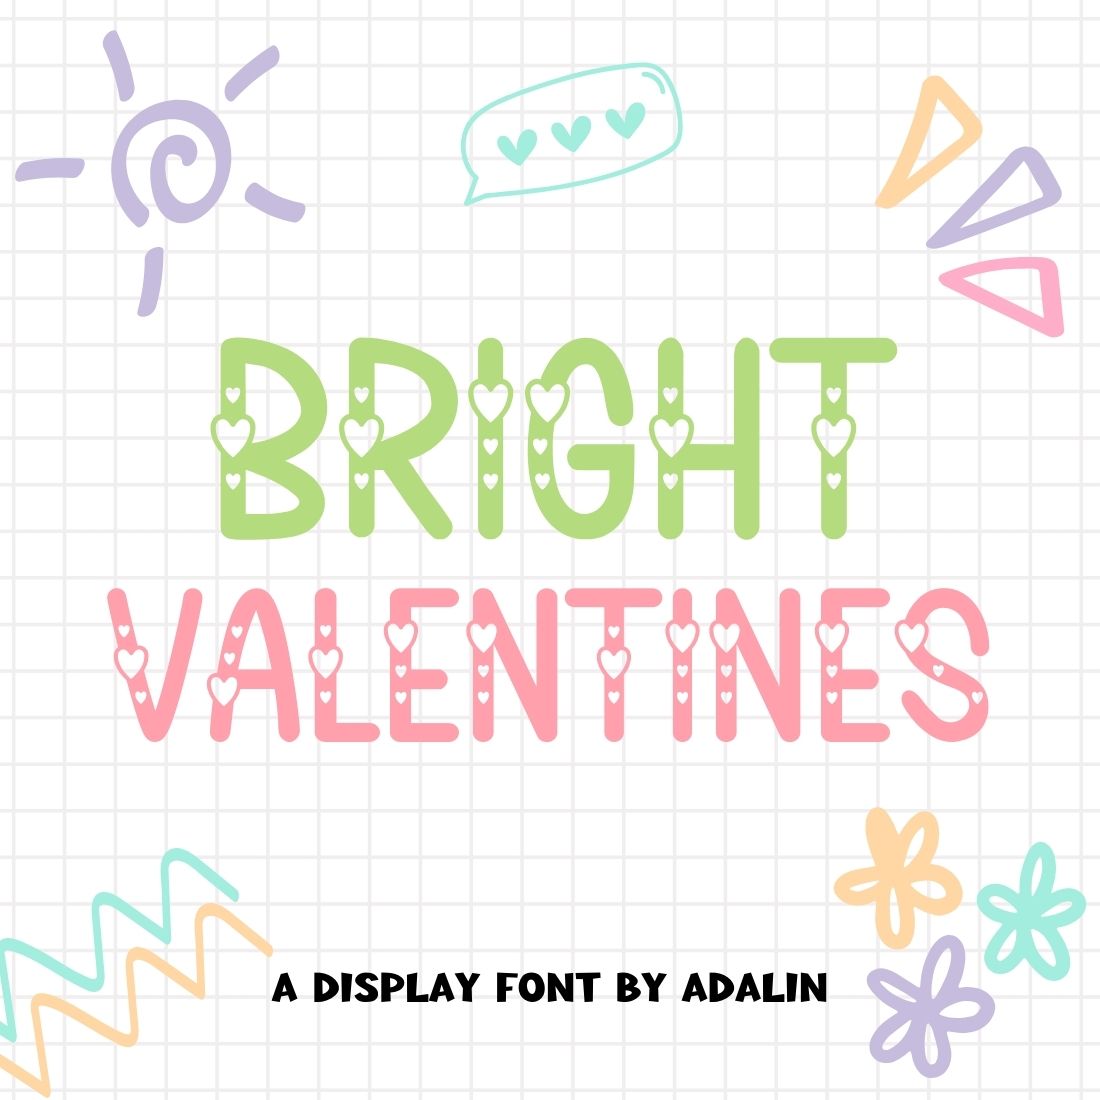 Bright Valentines - Display font cover image.